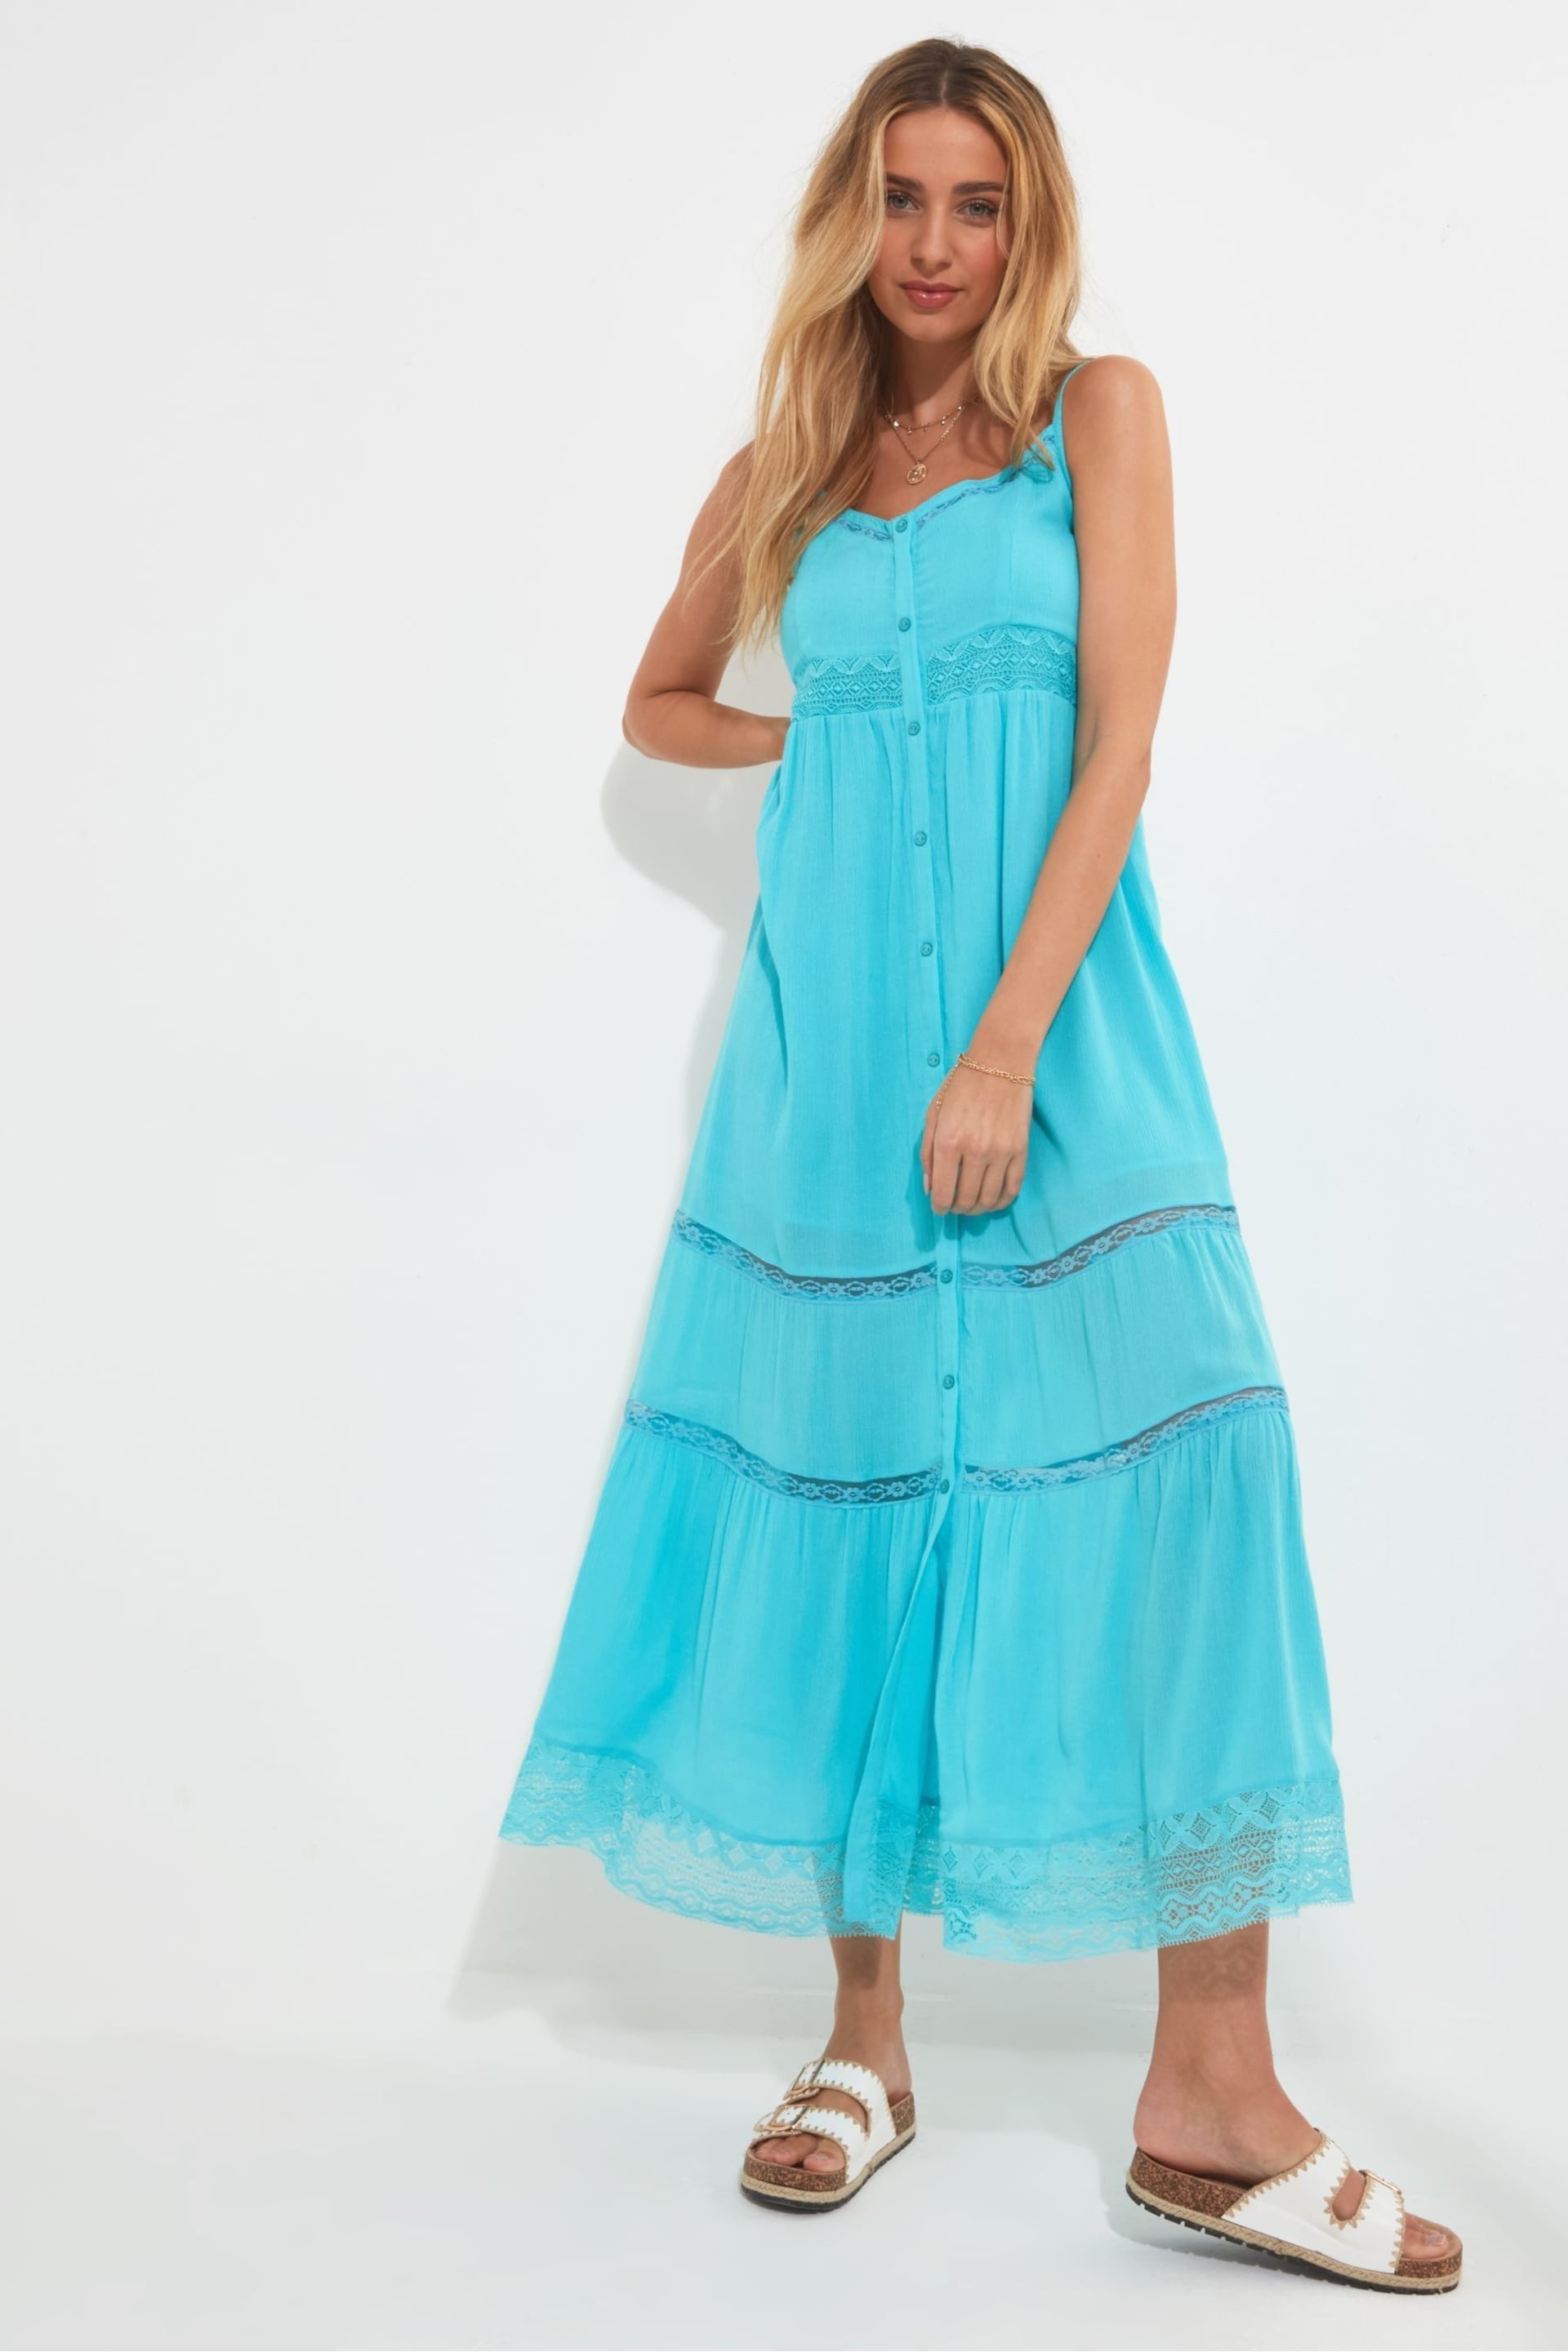 Joe Browns Blue Vibrant Tiered Strappy Button Through Maxi Sundress - Image 4 of 7